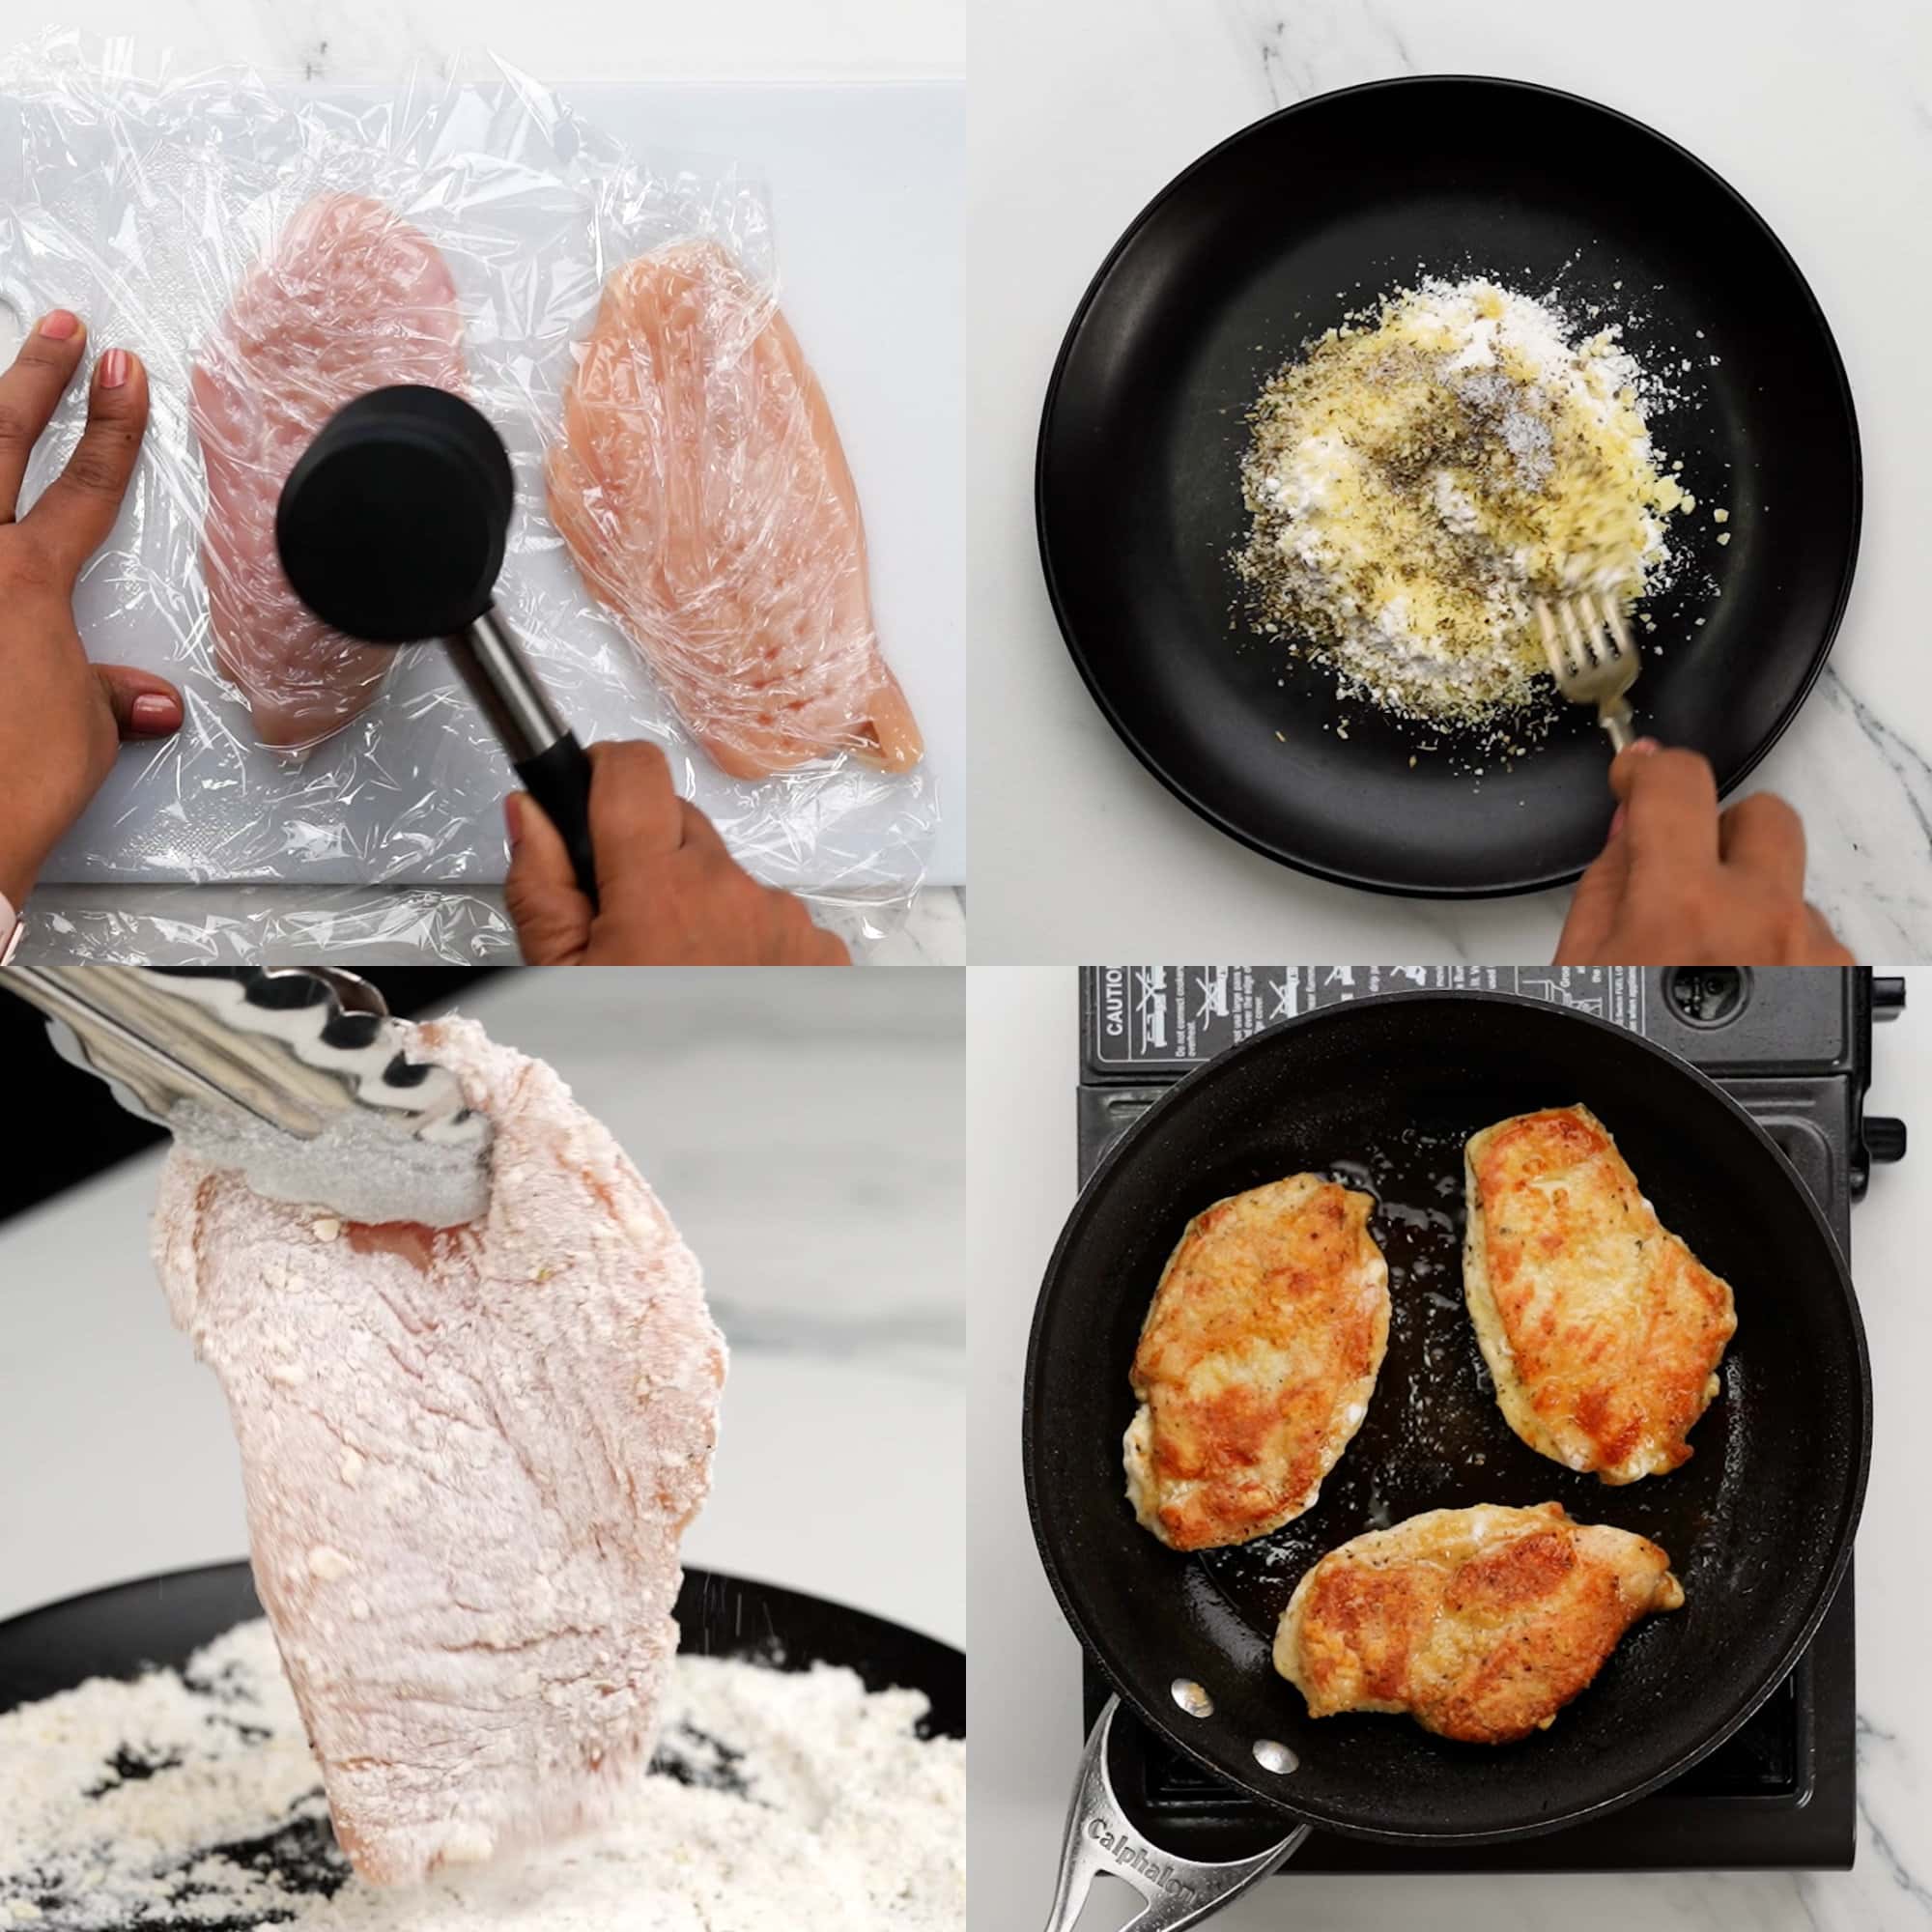 Coat chicken pieces with flour and parmesan mixture. Pan fry dreged chicken breast pieces in a hot pan/skillet until cripsy. 